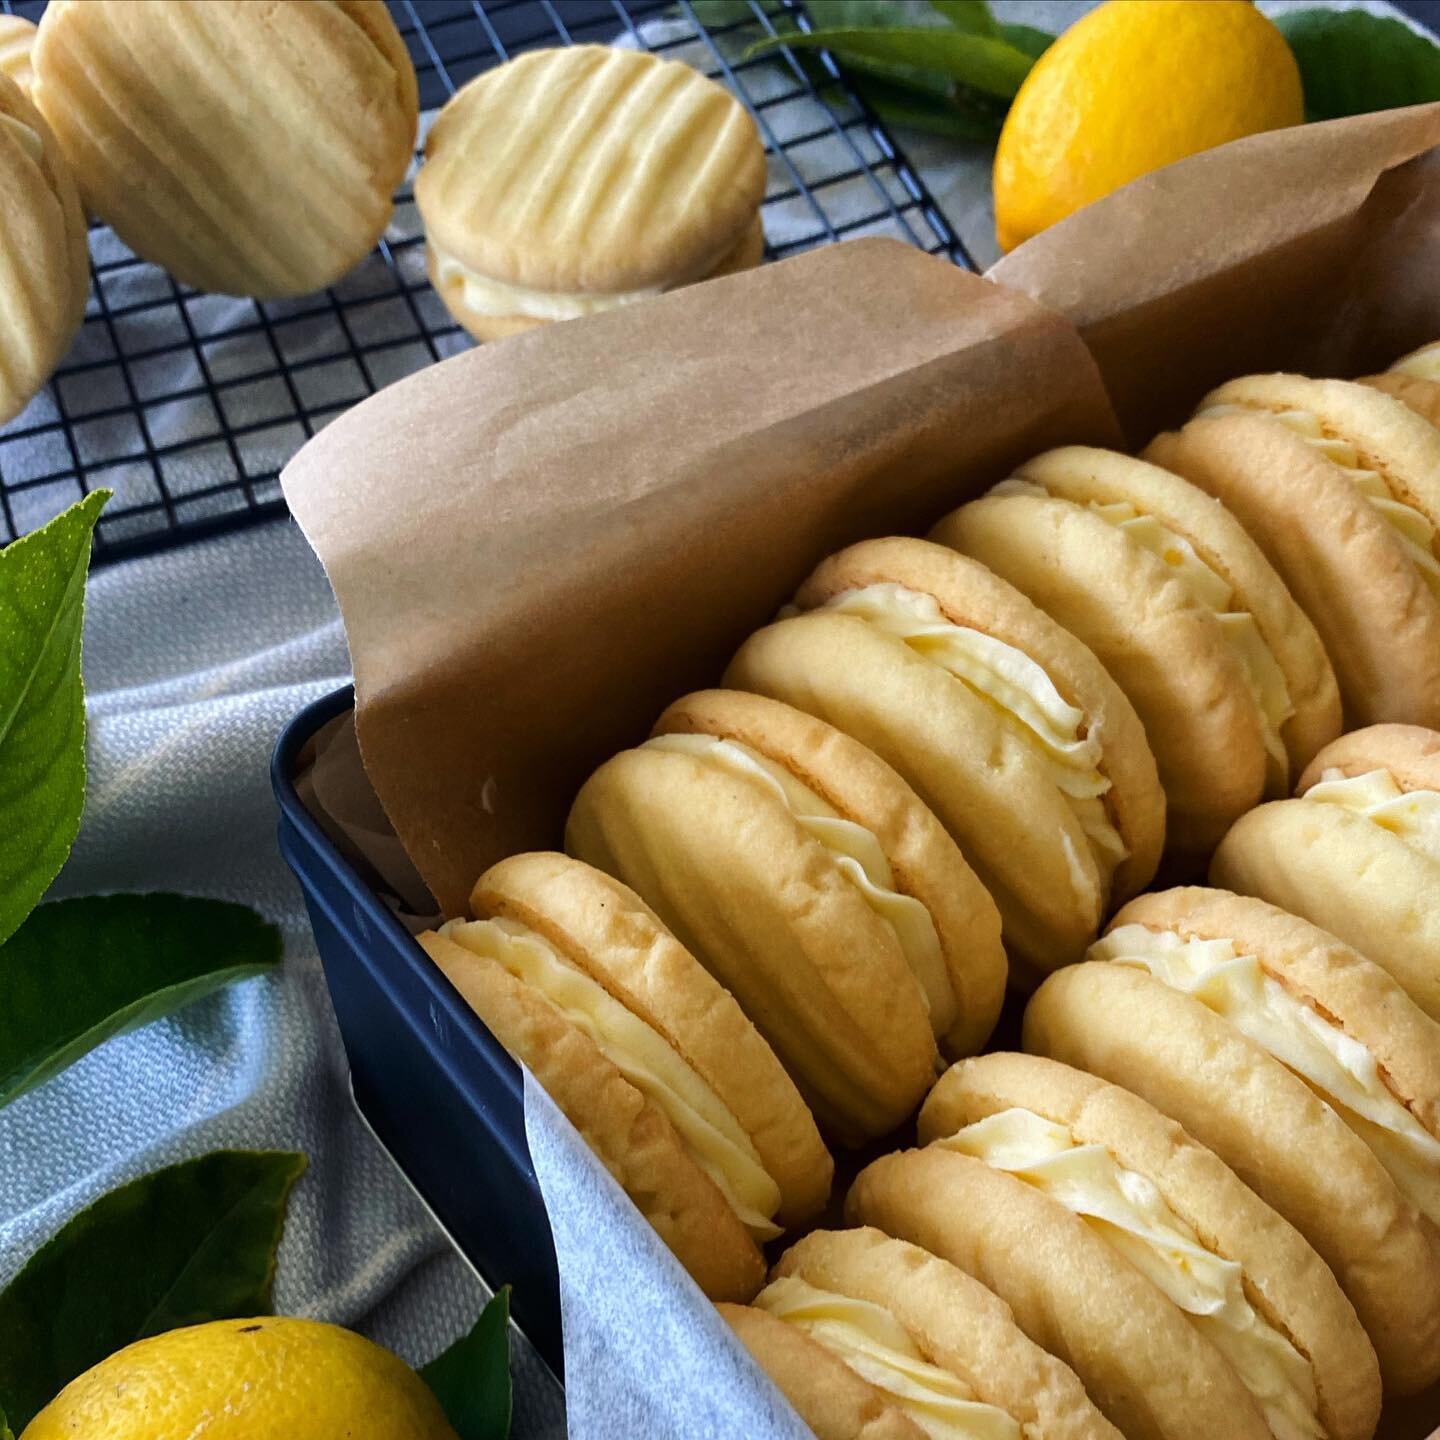 Recipe for Lemon Melting Moments is live now. Link in bio🍋💛🍋
.
.
.
#meltingmoments #lemons #biscuits #shortbread #pastry #pastrycook #pastrychef #biscuittin #recipedevelopment #foodwriting #foodstyle #fleurieupeninsula #adelaide #thefleurieukitche